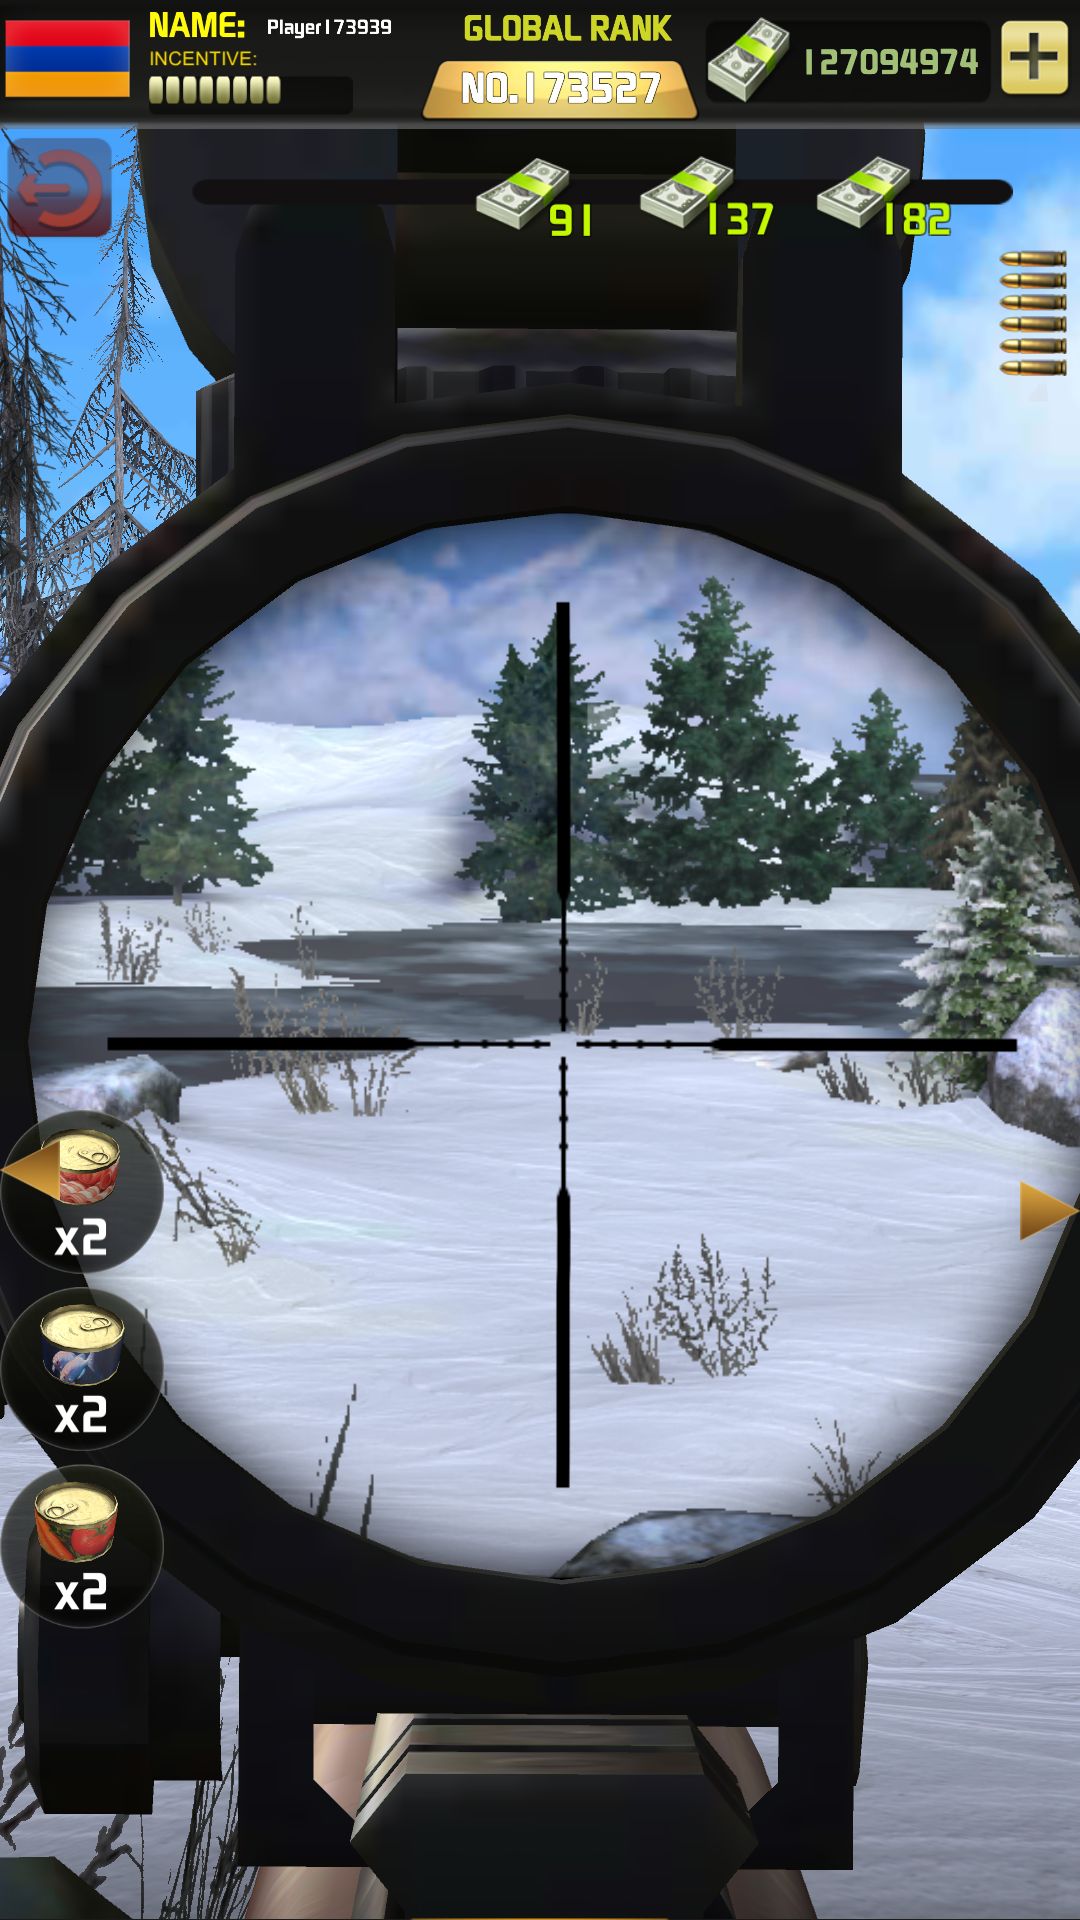 The Hunting World - 3D Wild Shooting Game - Android game screenshots.